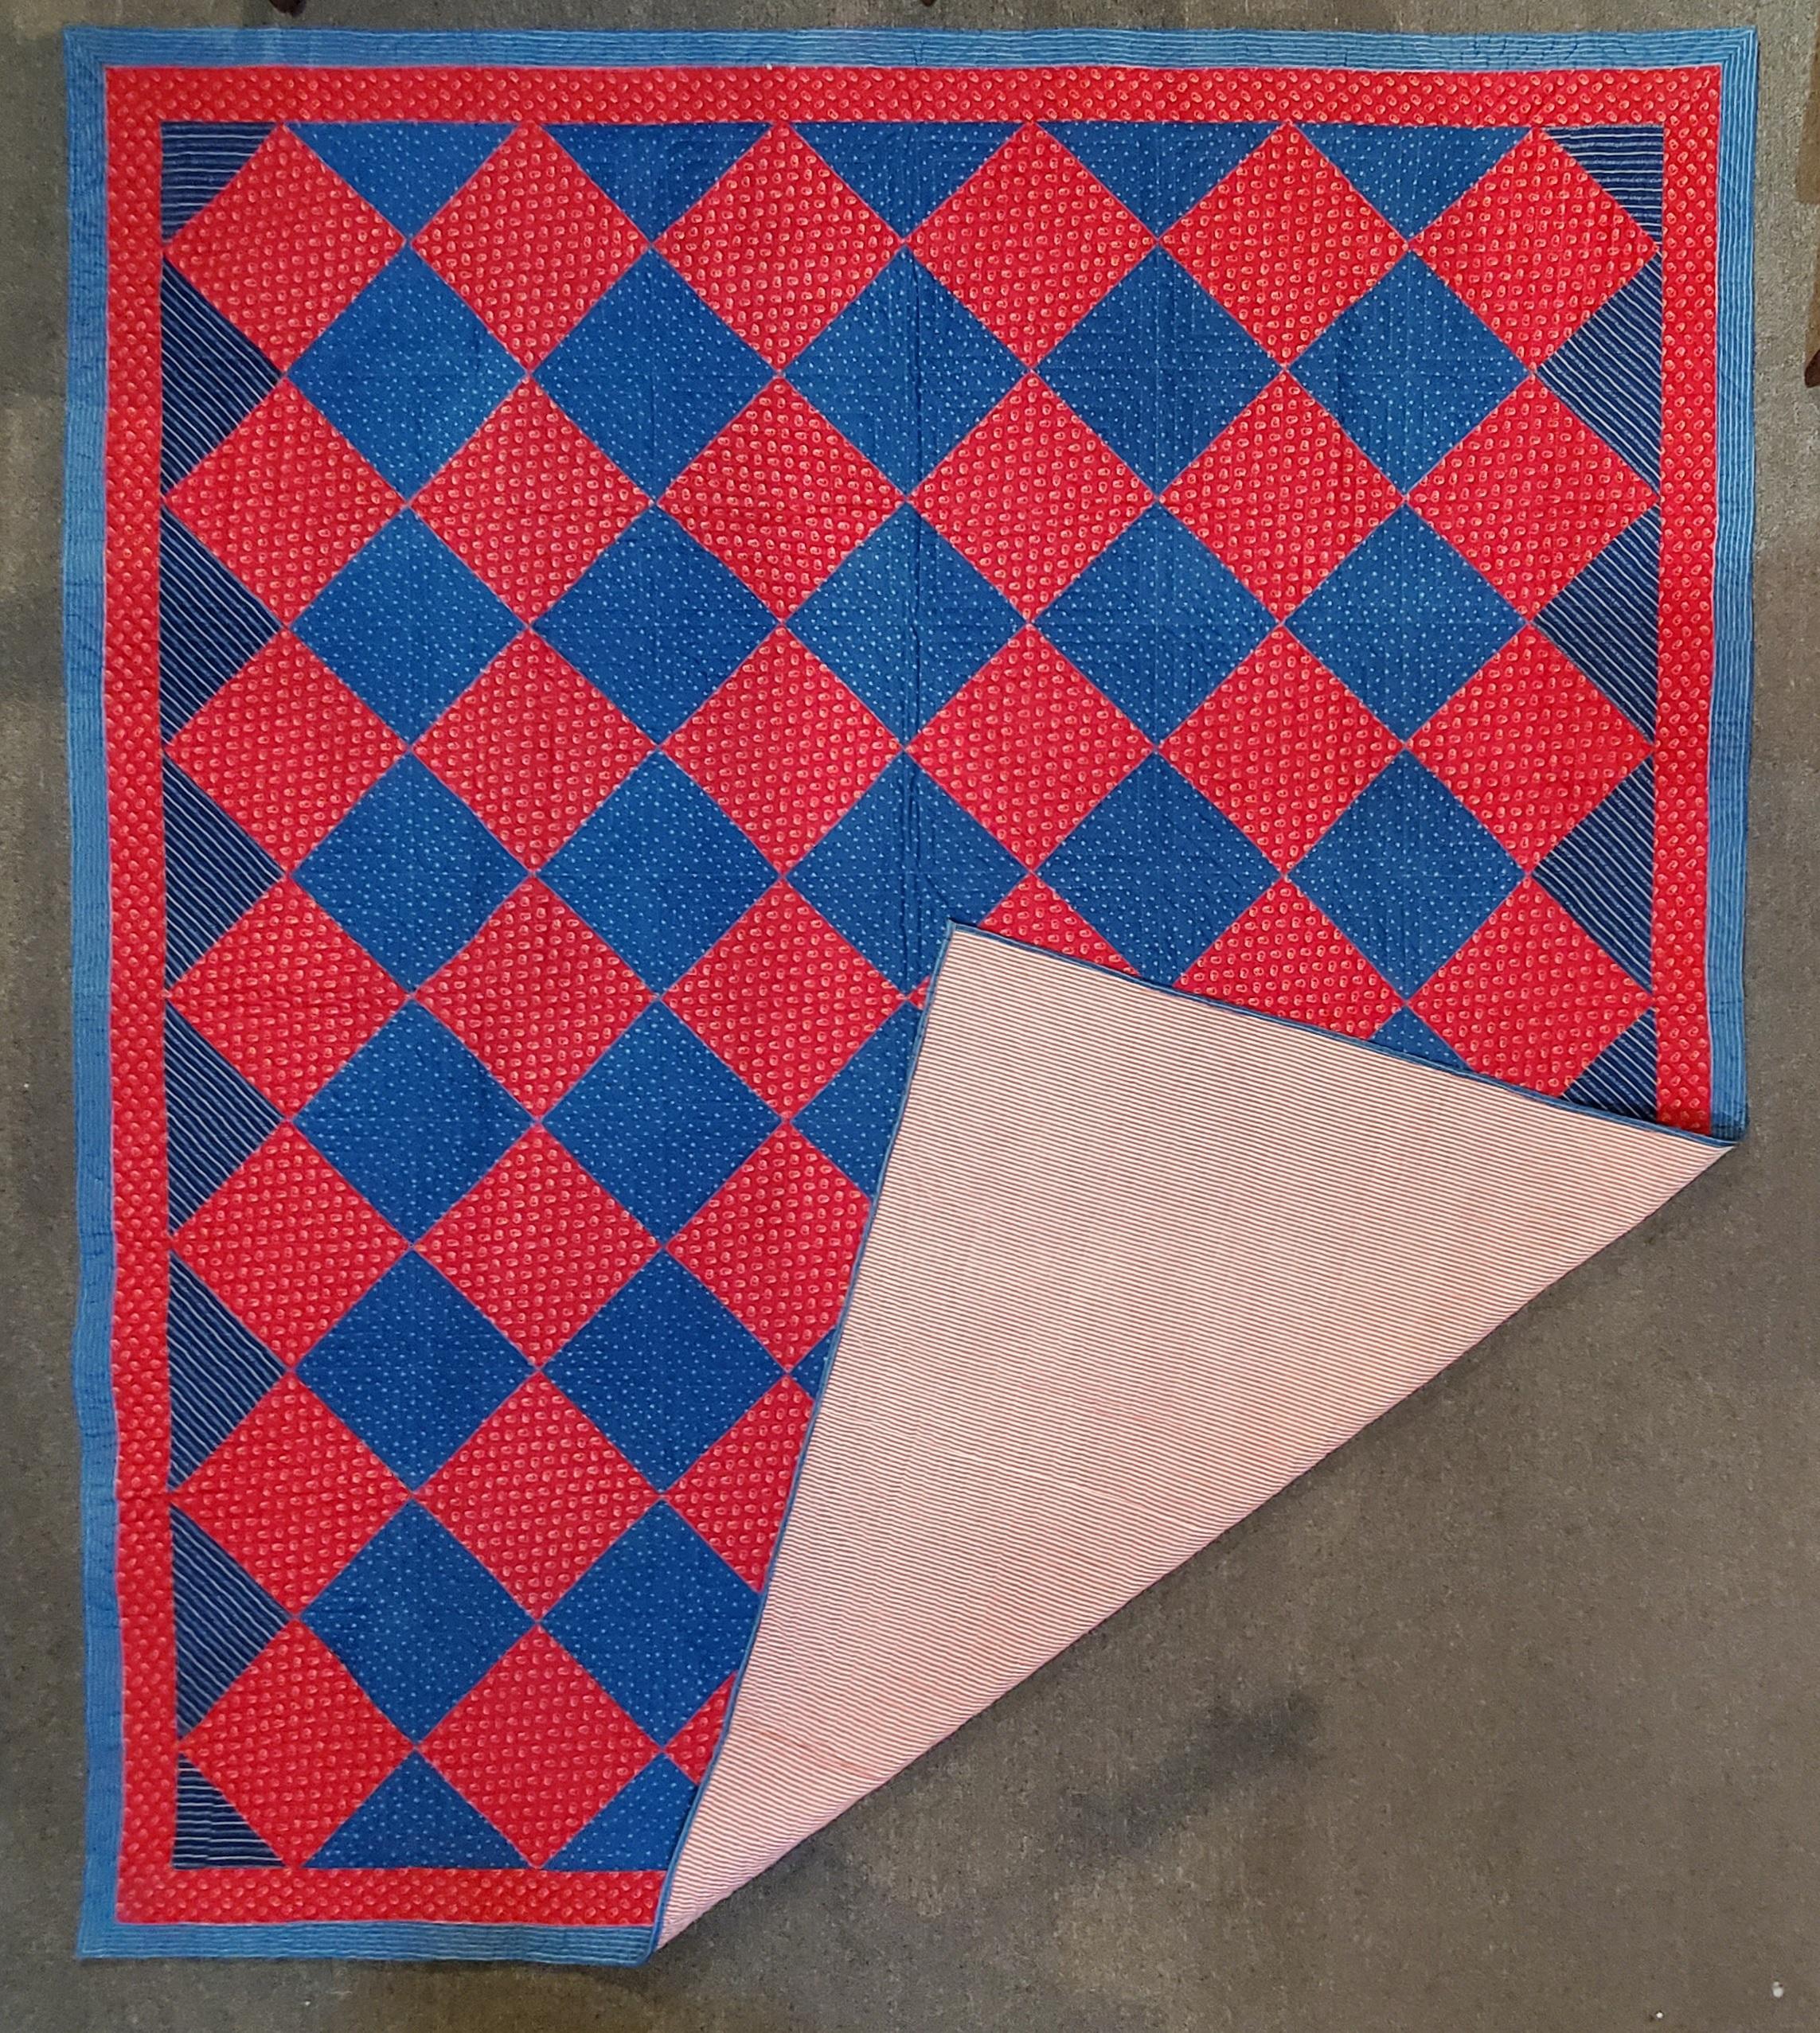 19Thc red & blue calico fabric squares or blocks in fine condition. The quilt has fine quilting and very good piecework.